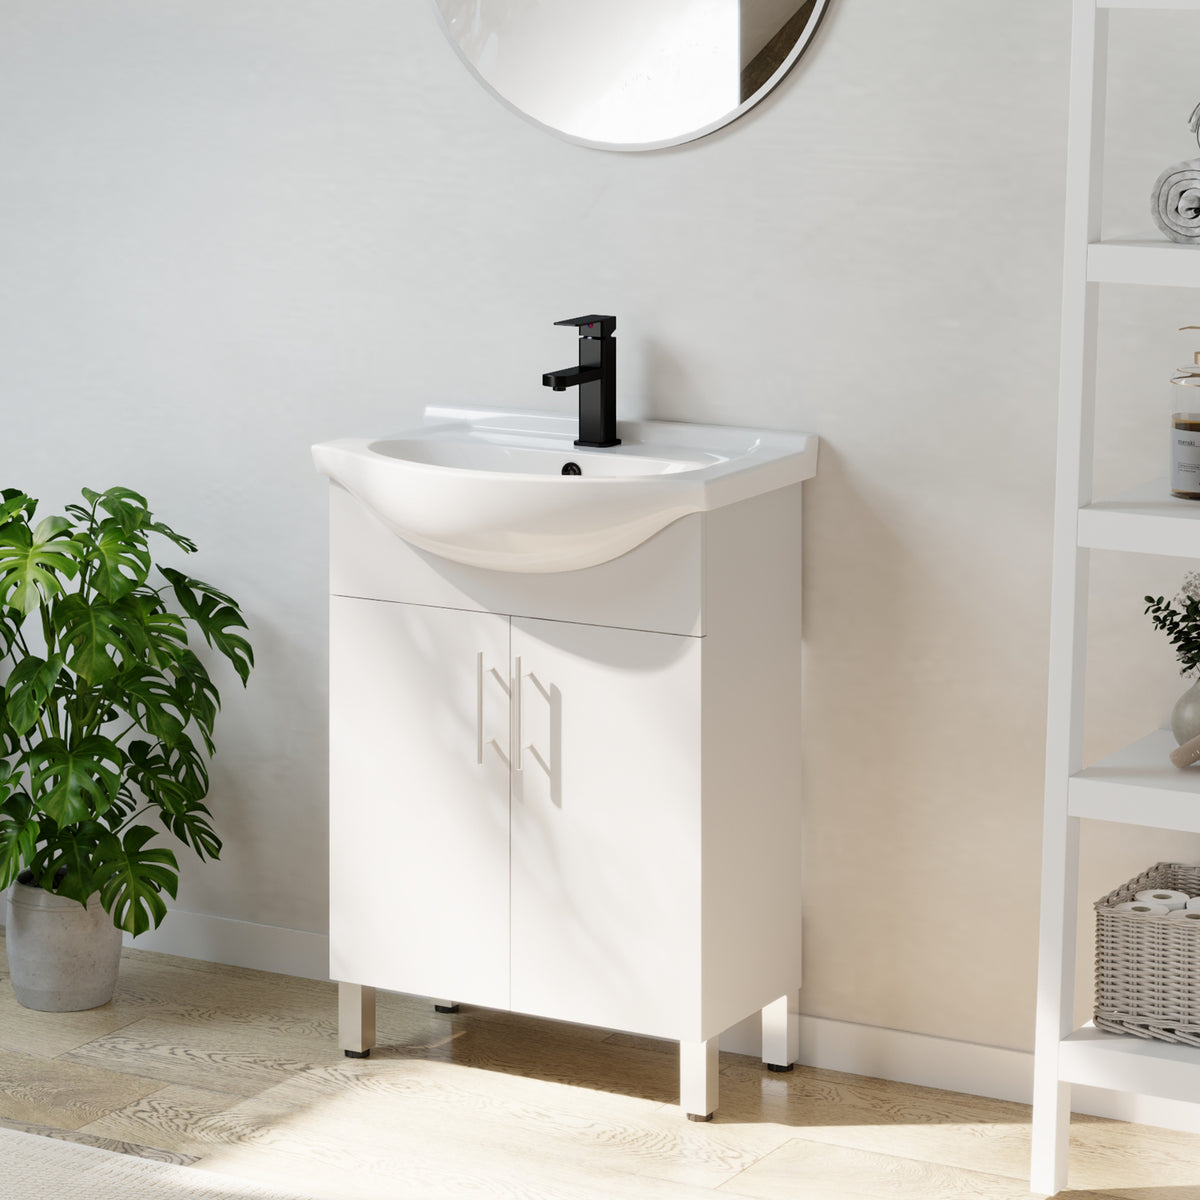 24" Freestanding Bathroom Vanities with Belly Bowl Ceramic Sink Combo Set with Integrated Sink